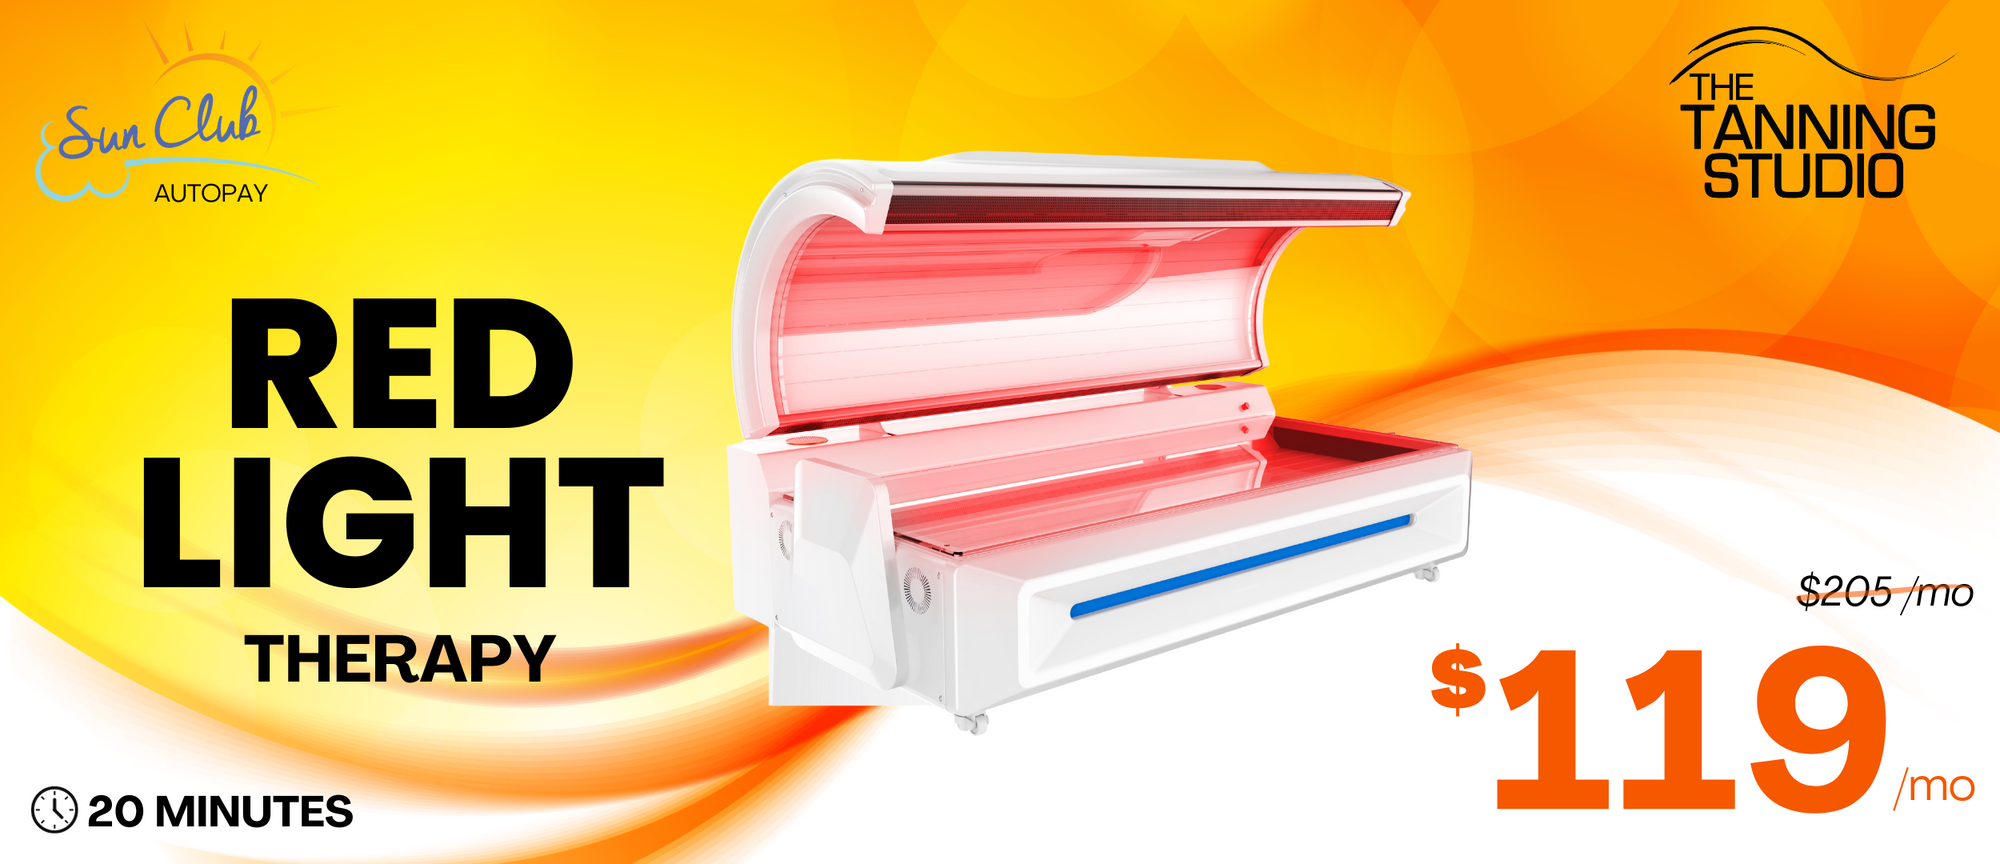 Red Light Therapy Sun Club. 20 Minute Sessions. Only $119/mo, regular price $205/mo.